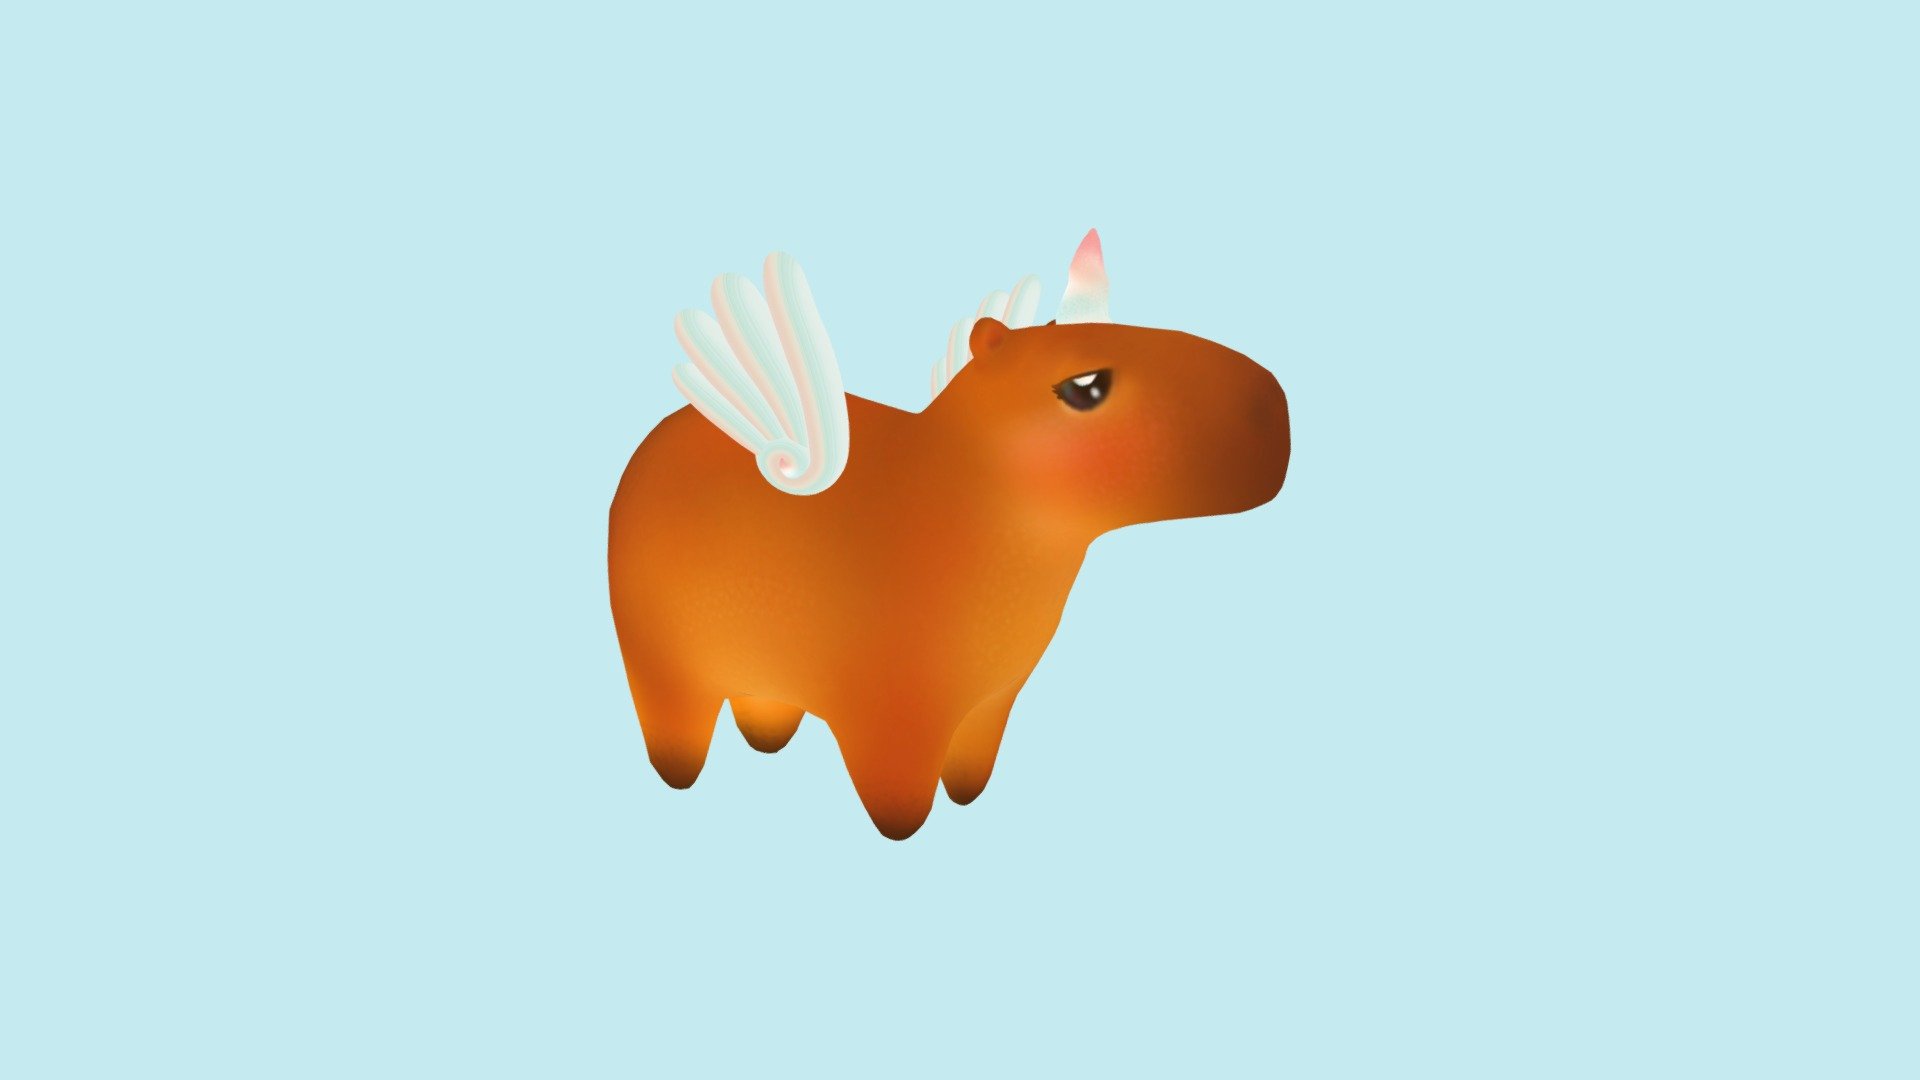 Cute low poly flying unicorn capybara.
It's rigged and comes with 4 animations: idle, flying fast, flying slow, and trotting.
FBX versions are separated into one animation each archive for convenience 3d model